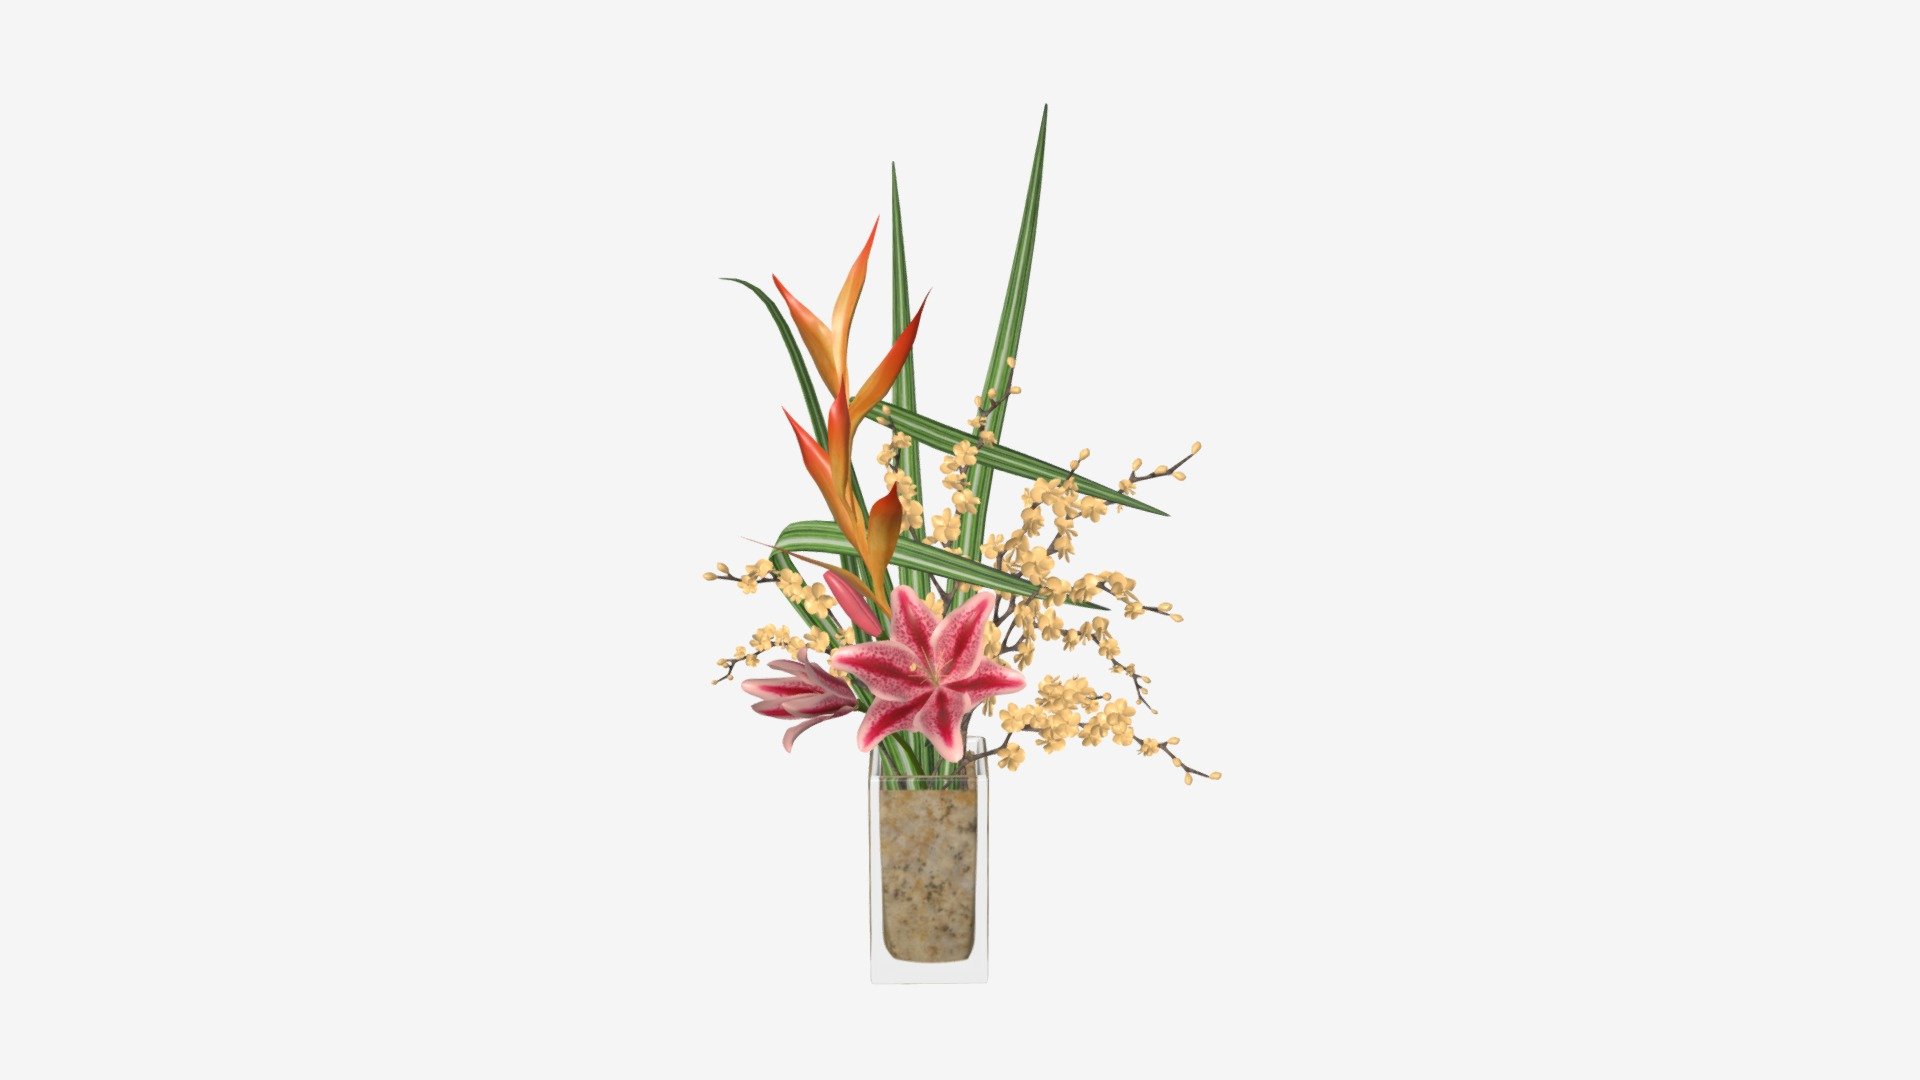 Lily bouquet with cherry branch